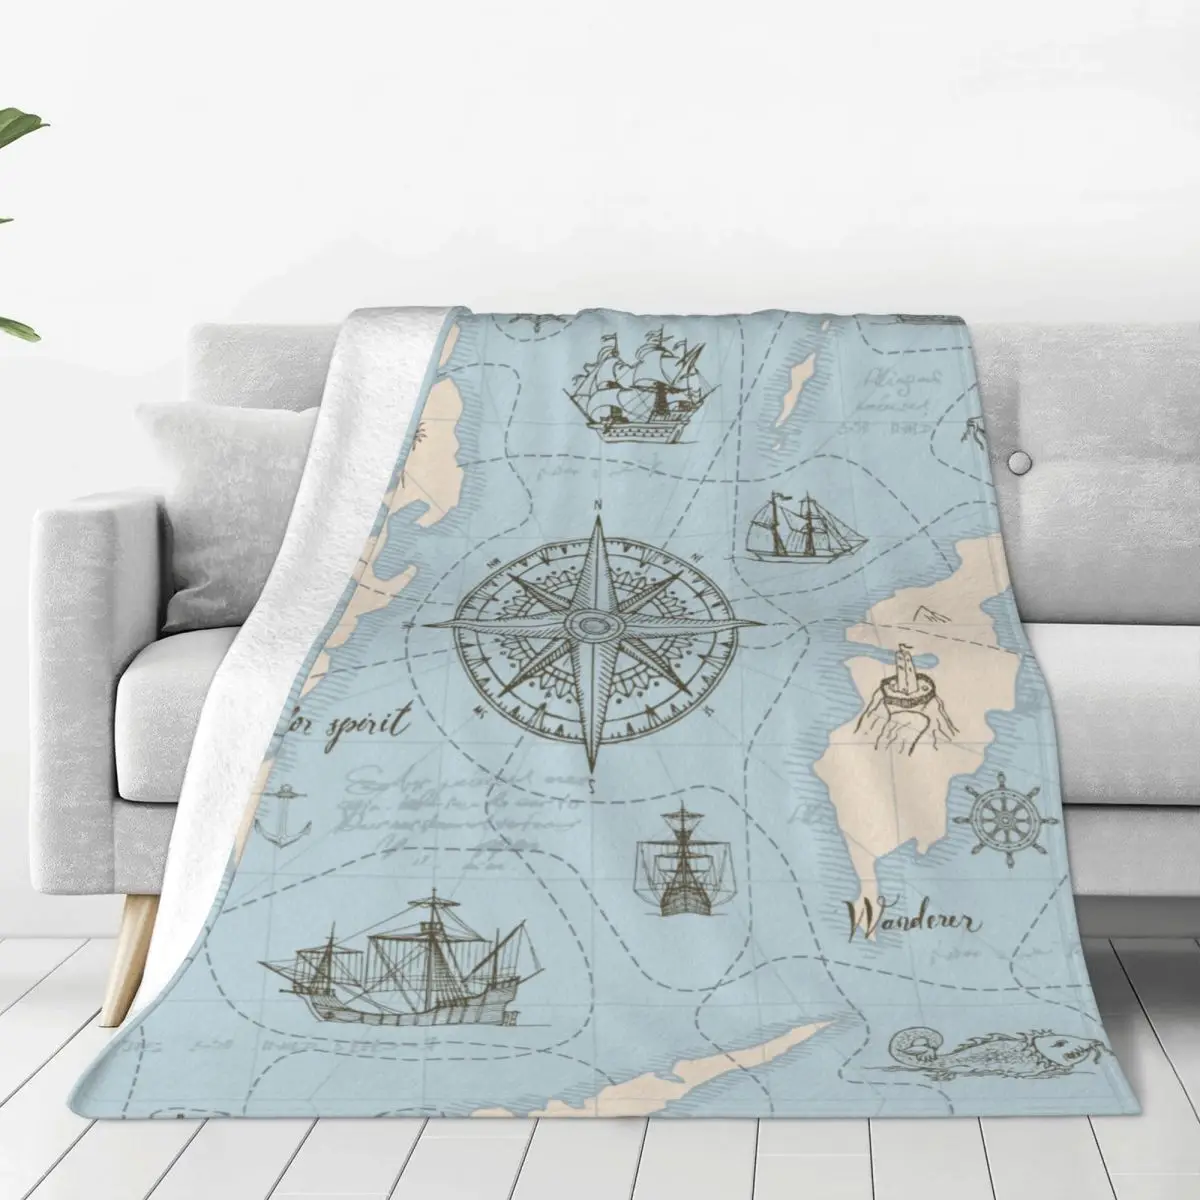 

Blue Sea Map Knitted Blanket Vintage Sailing Yachts Wool Throw Blanket Summer Air Conditioning Personalised Lightweight Bedsprea